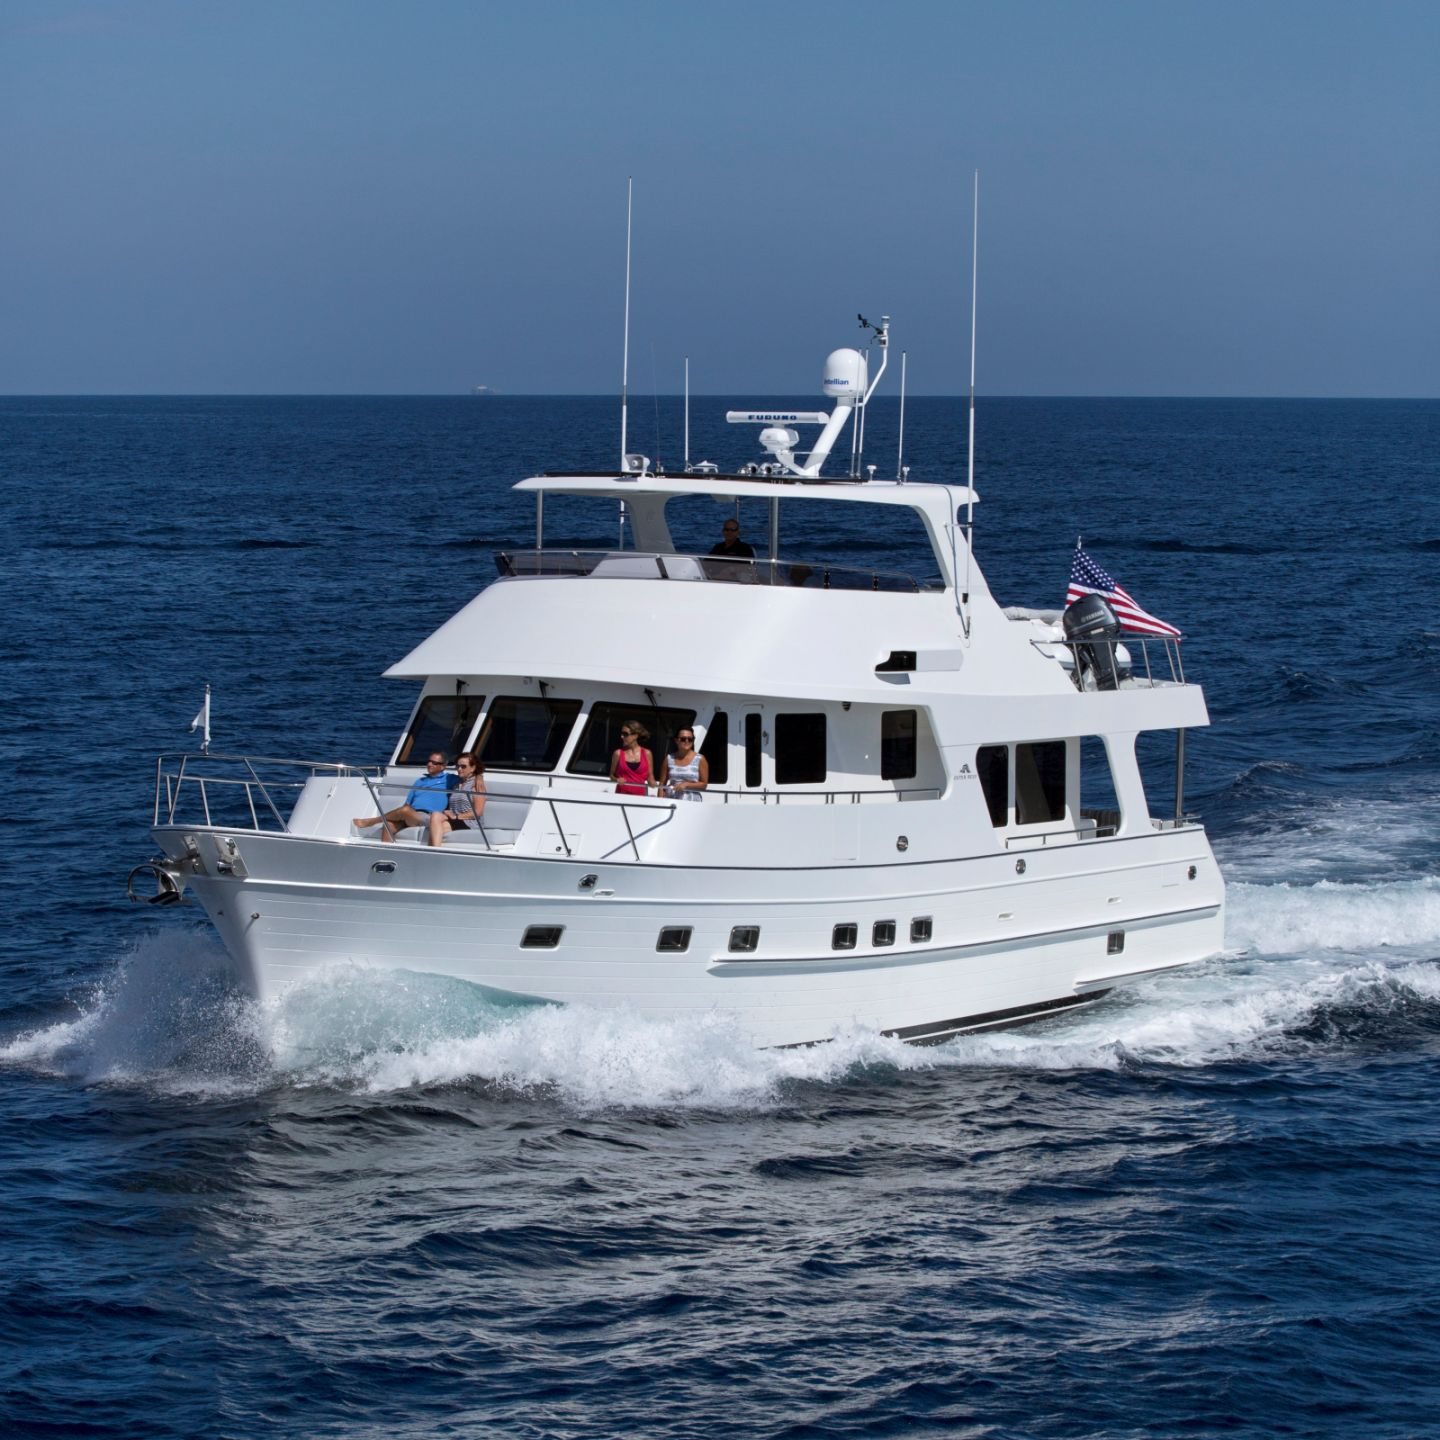 360 VR Virtual Tours of the Outer Reef 580 Motoryacht